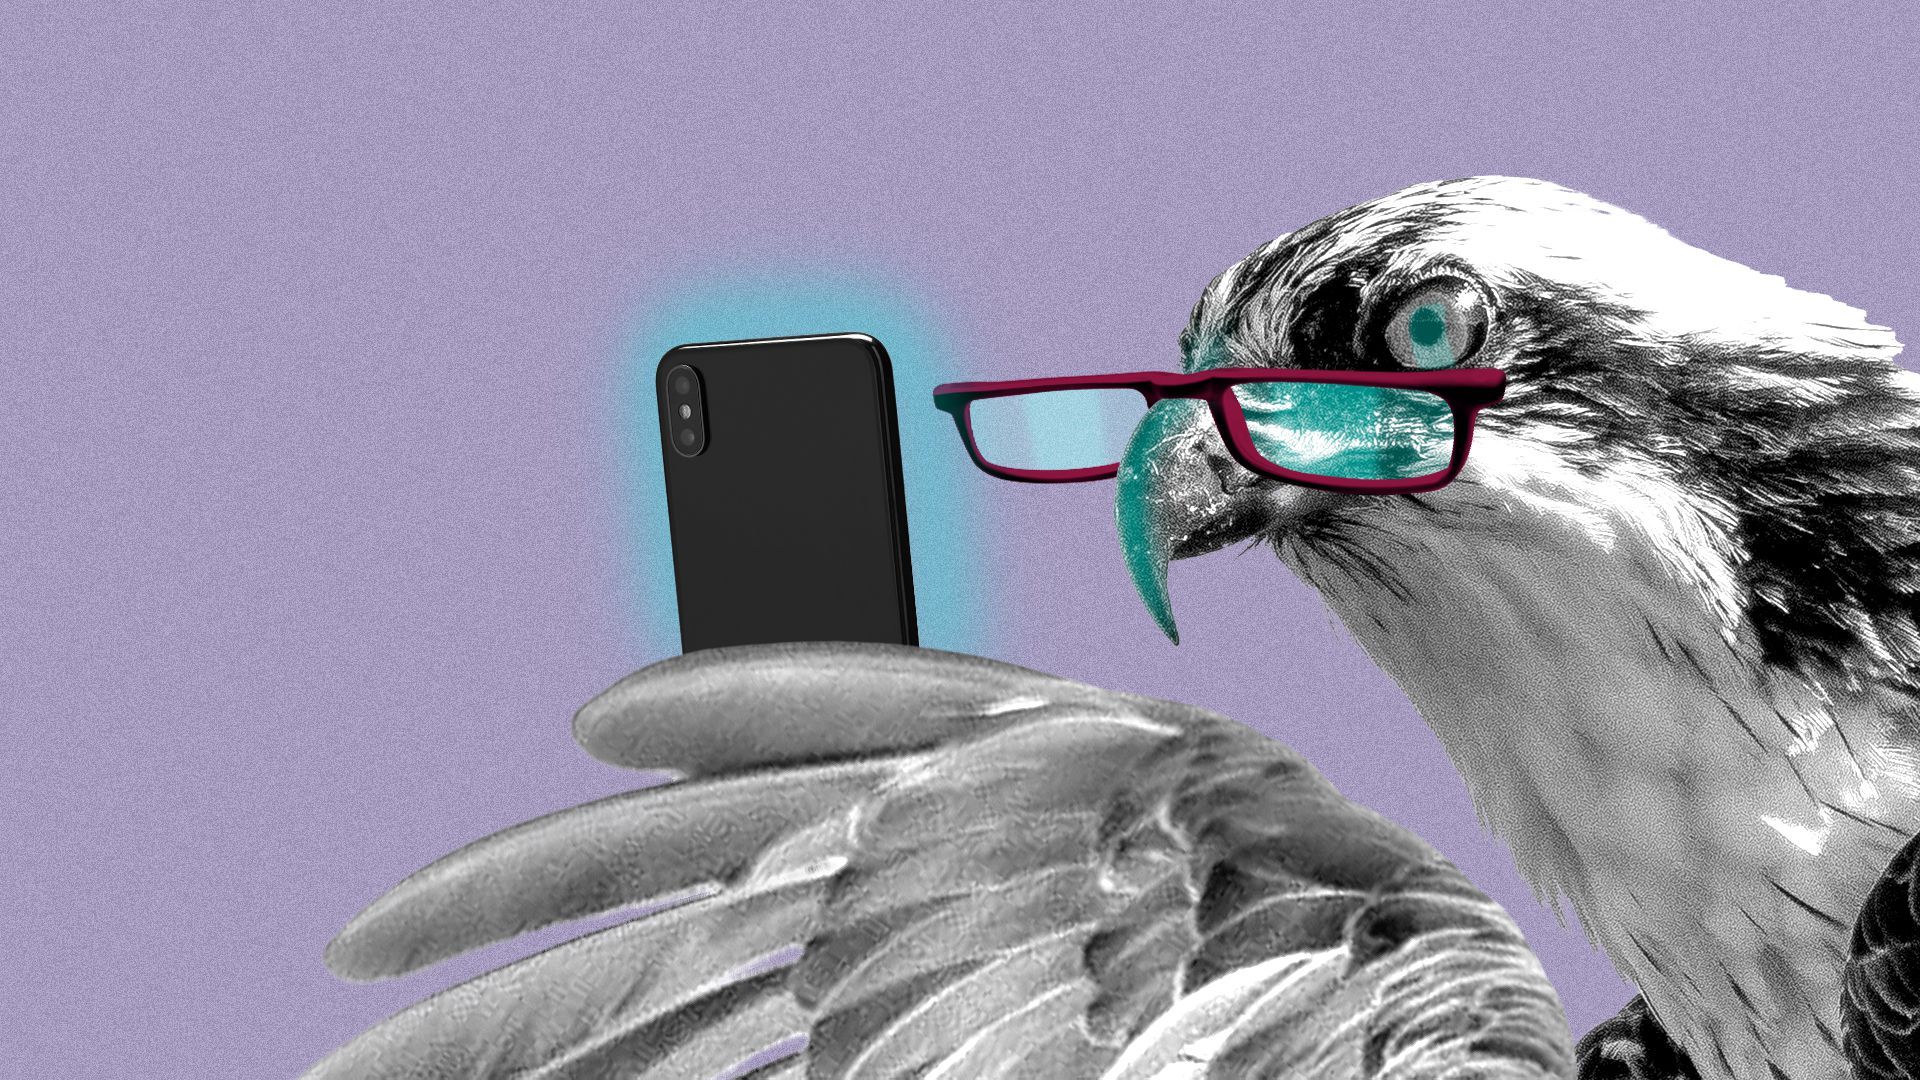 Illustration of an osprey wearing reading glasses and reading its phone.